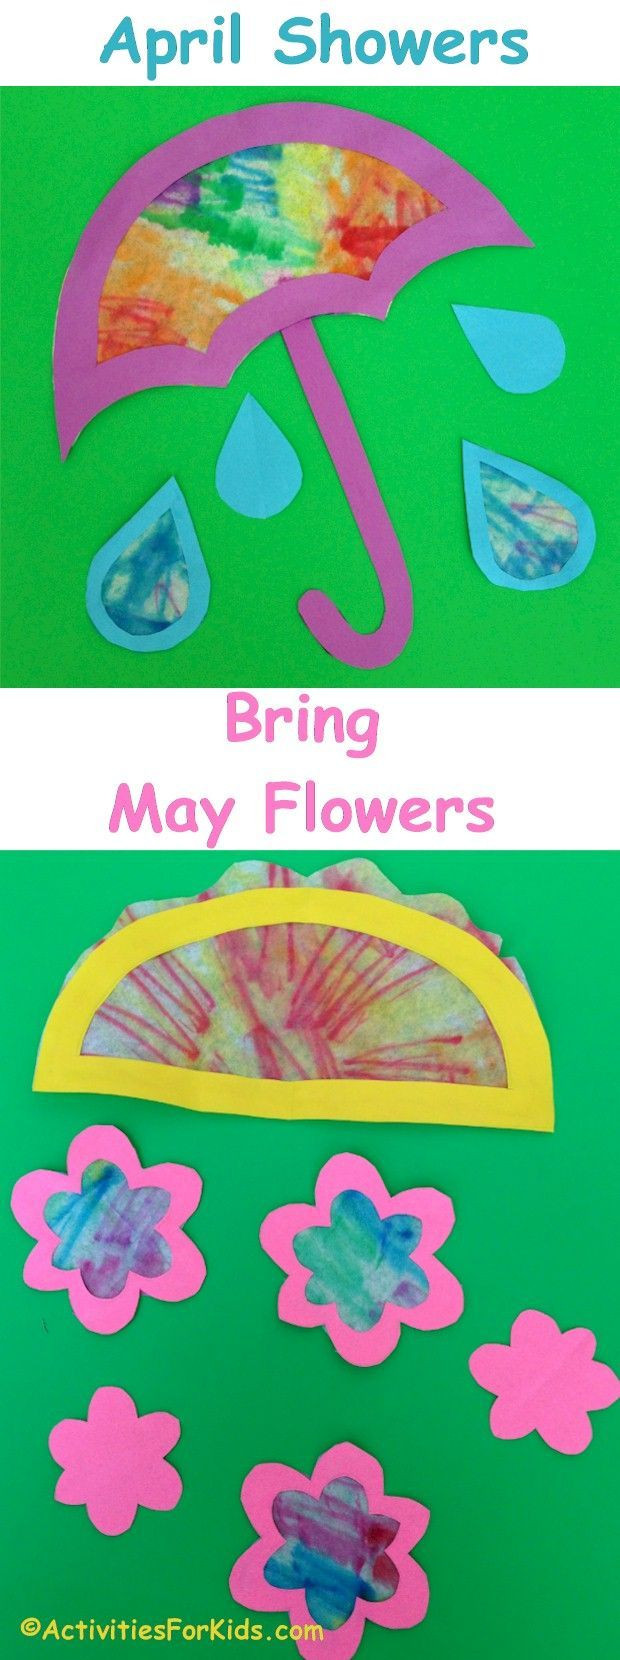 May Art Projects For Preschoolers
 April Showers Bring May Flowers